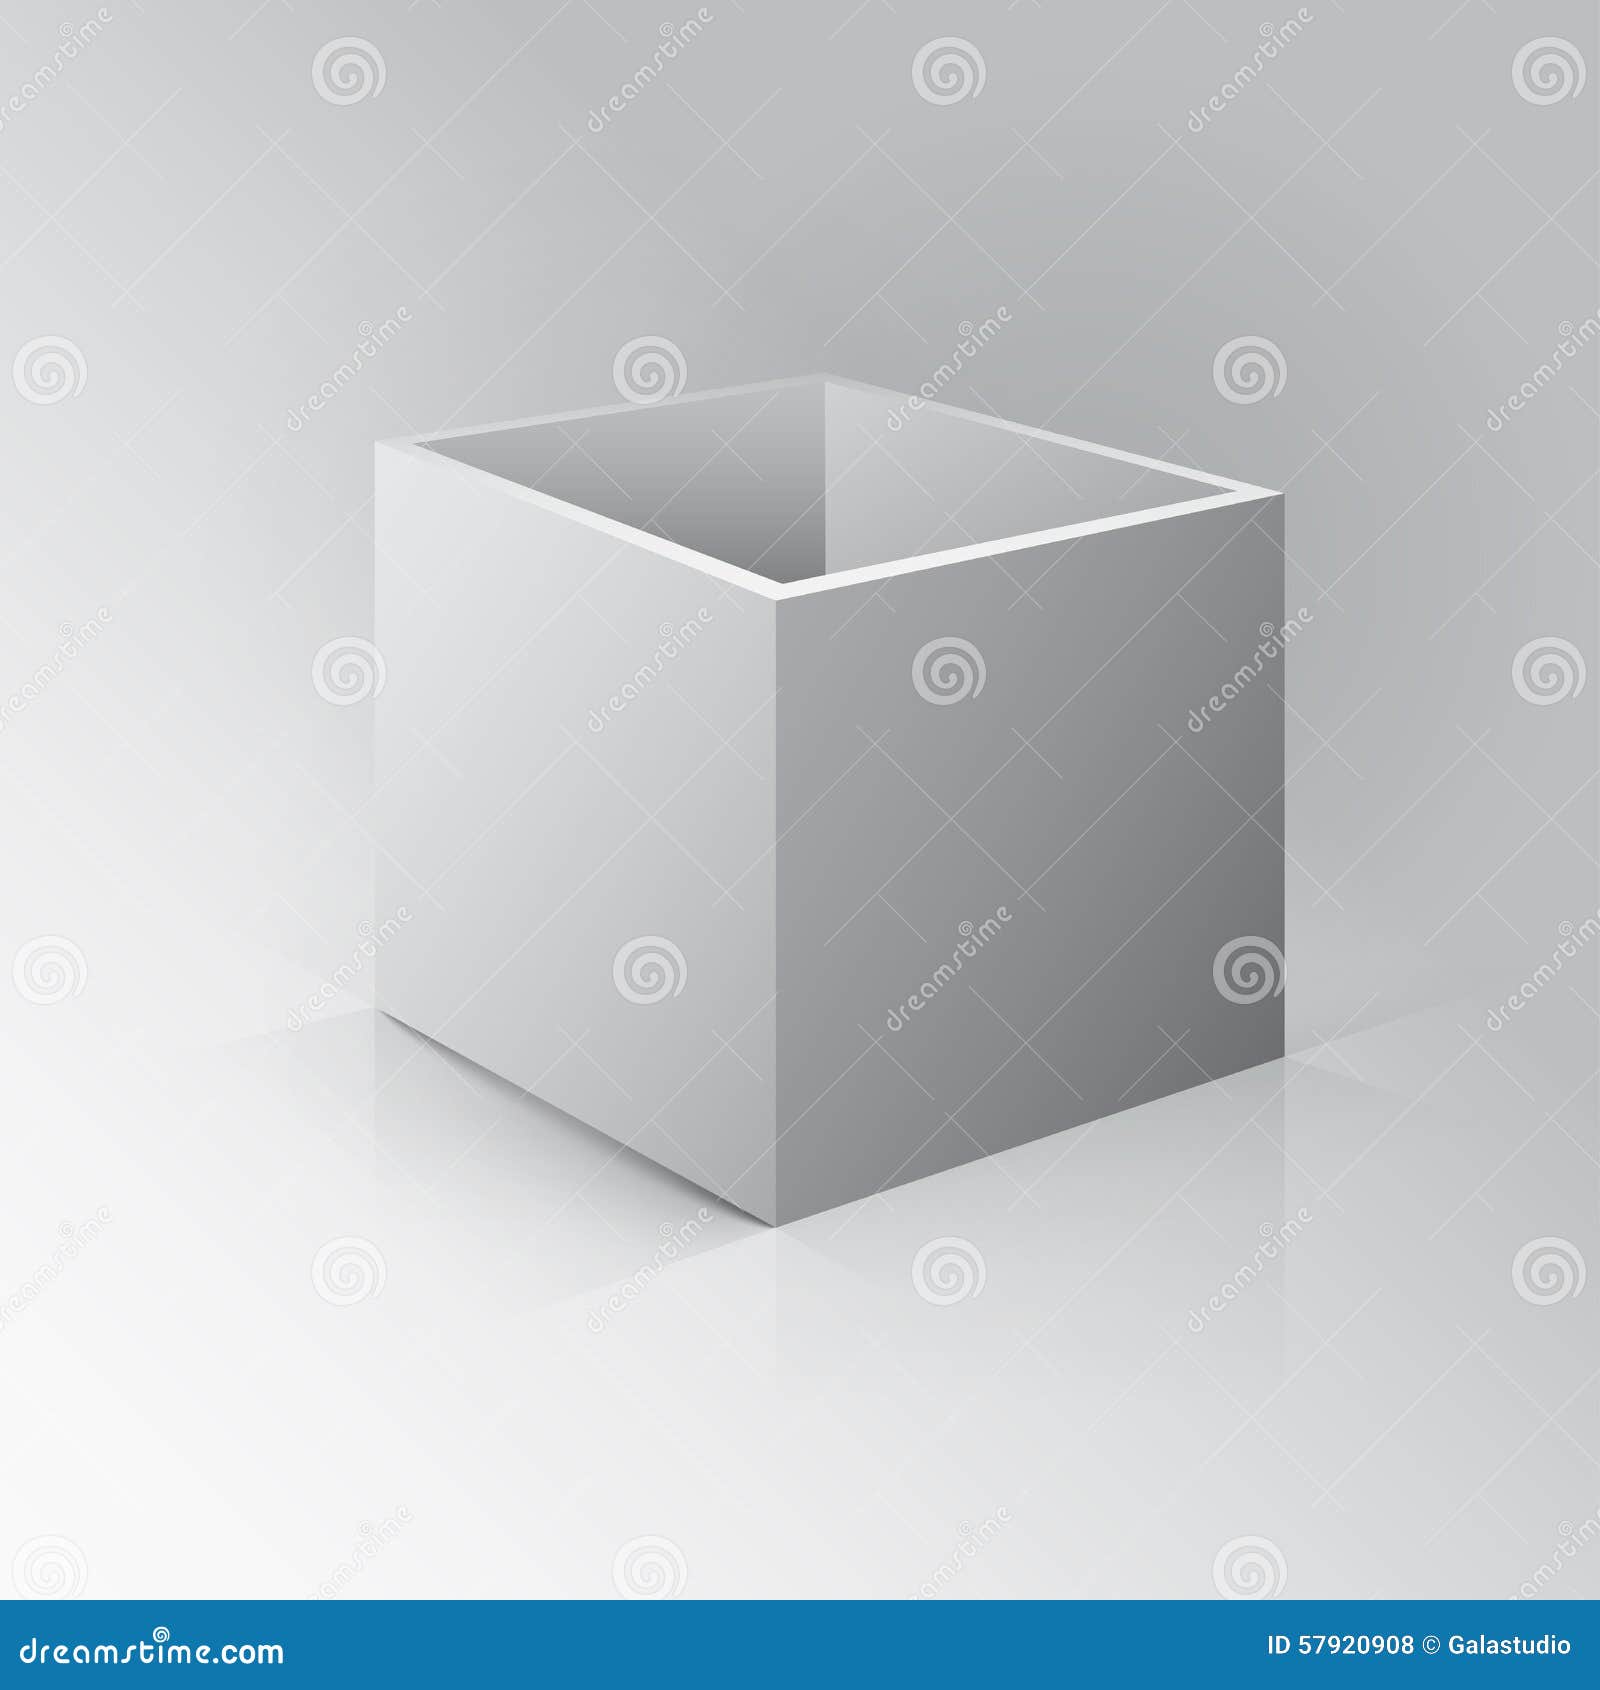 Download 3D Open Box Mockup. Box On White Background With ...